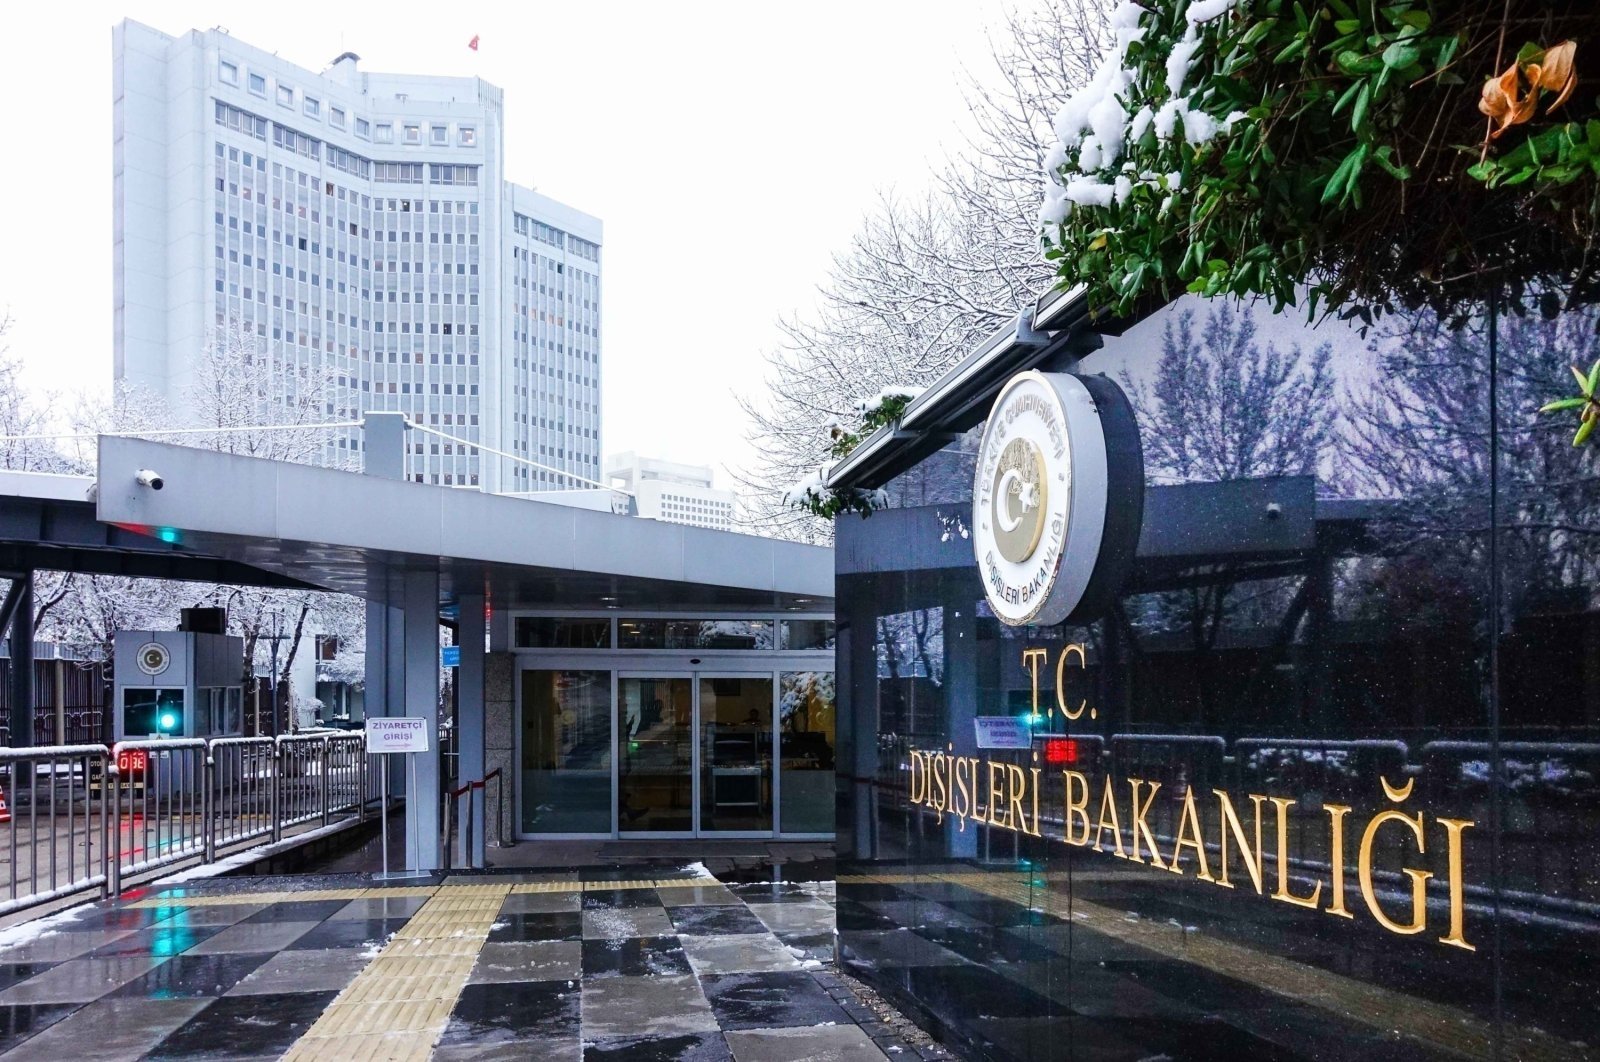 The Ministry of Foreign Affairs building in Ankara, Türkiye, Dec. 22, 2018. (Getty Images)